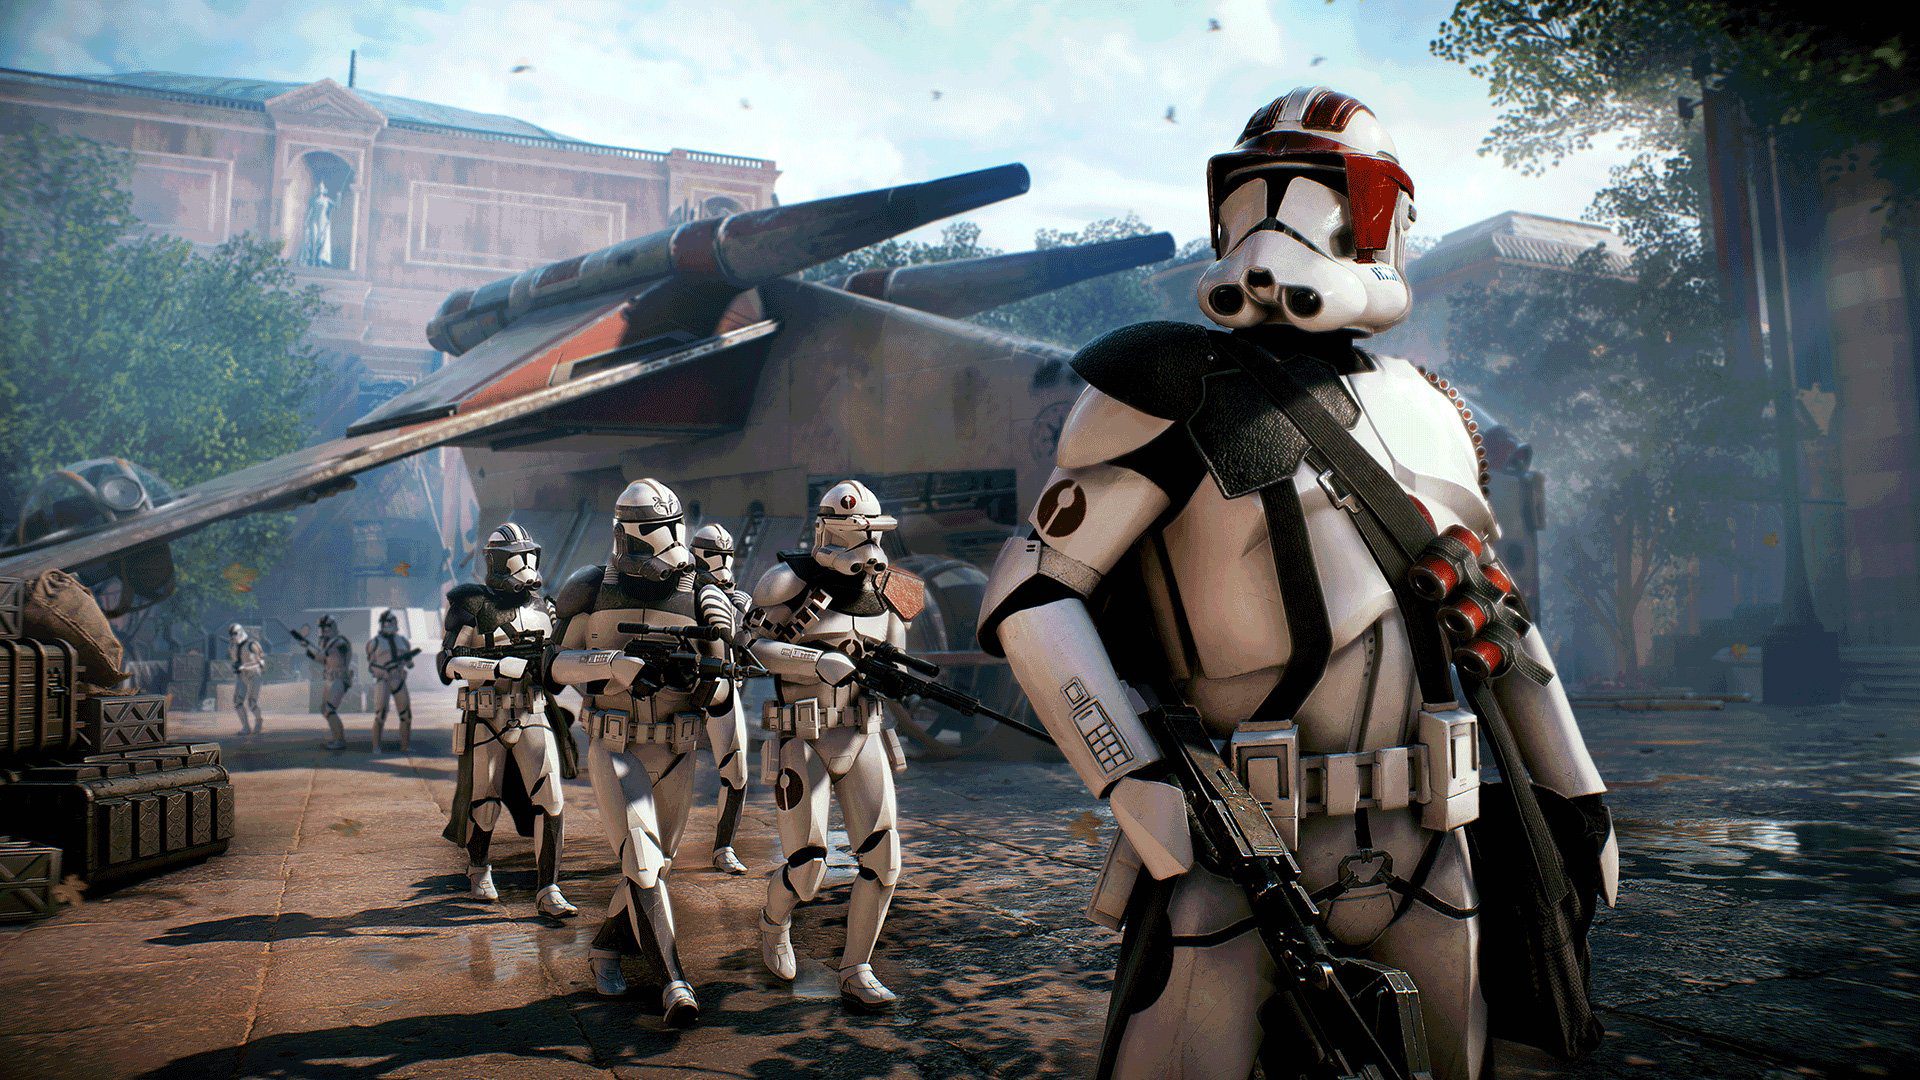 Star Wars Battlefront 2: Celebration Edition is Free Next Week on Epic  Games Store